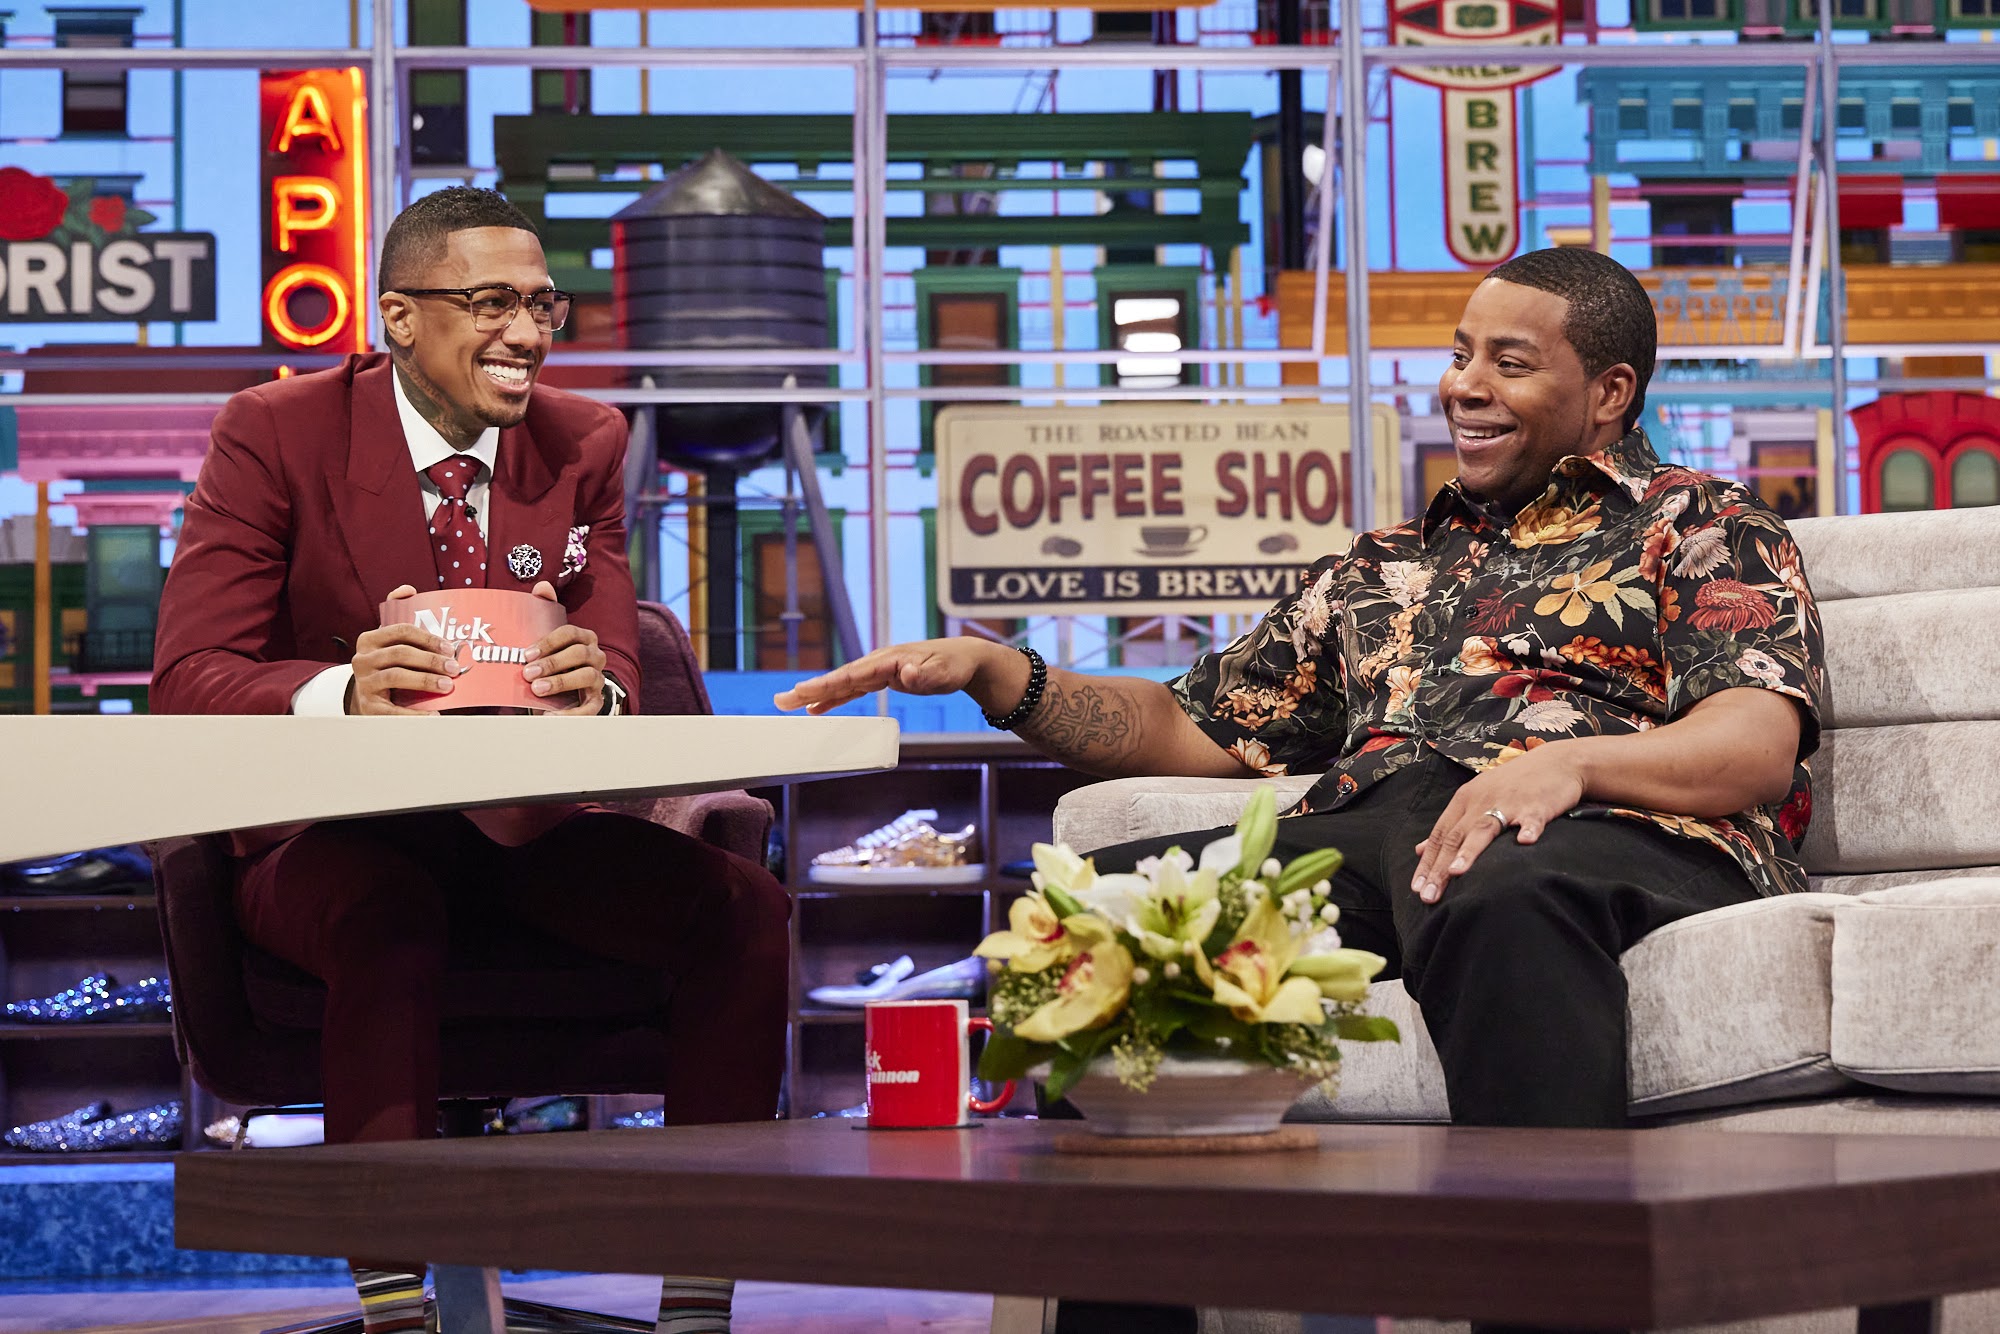 In Case You Missed It: Kenan Thompson Stops By ‘Nick Cannon Show’